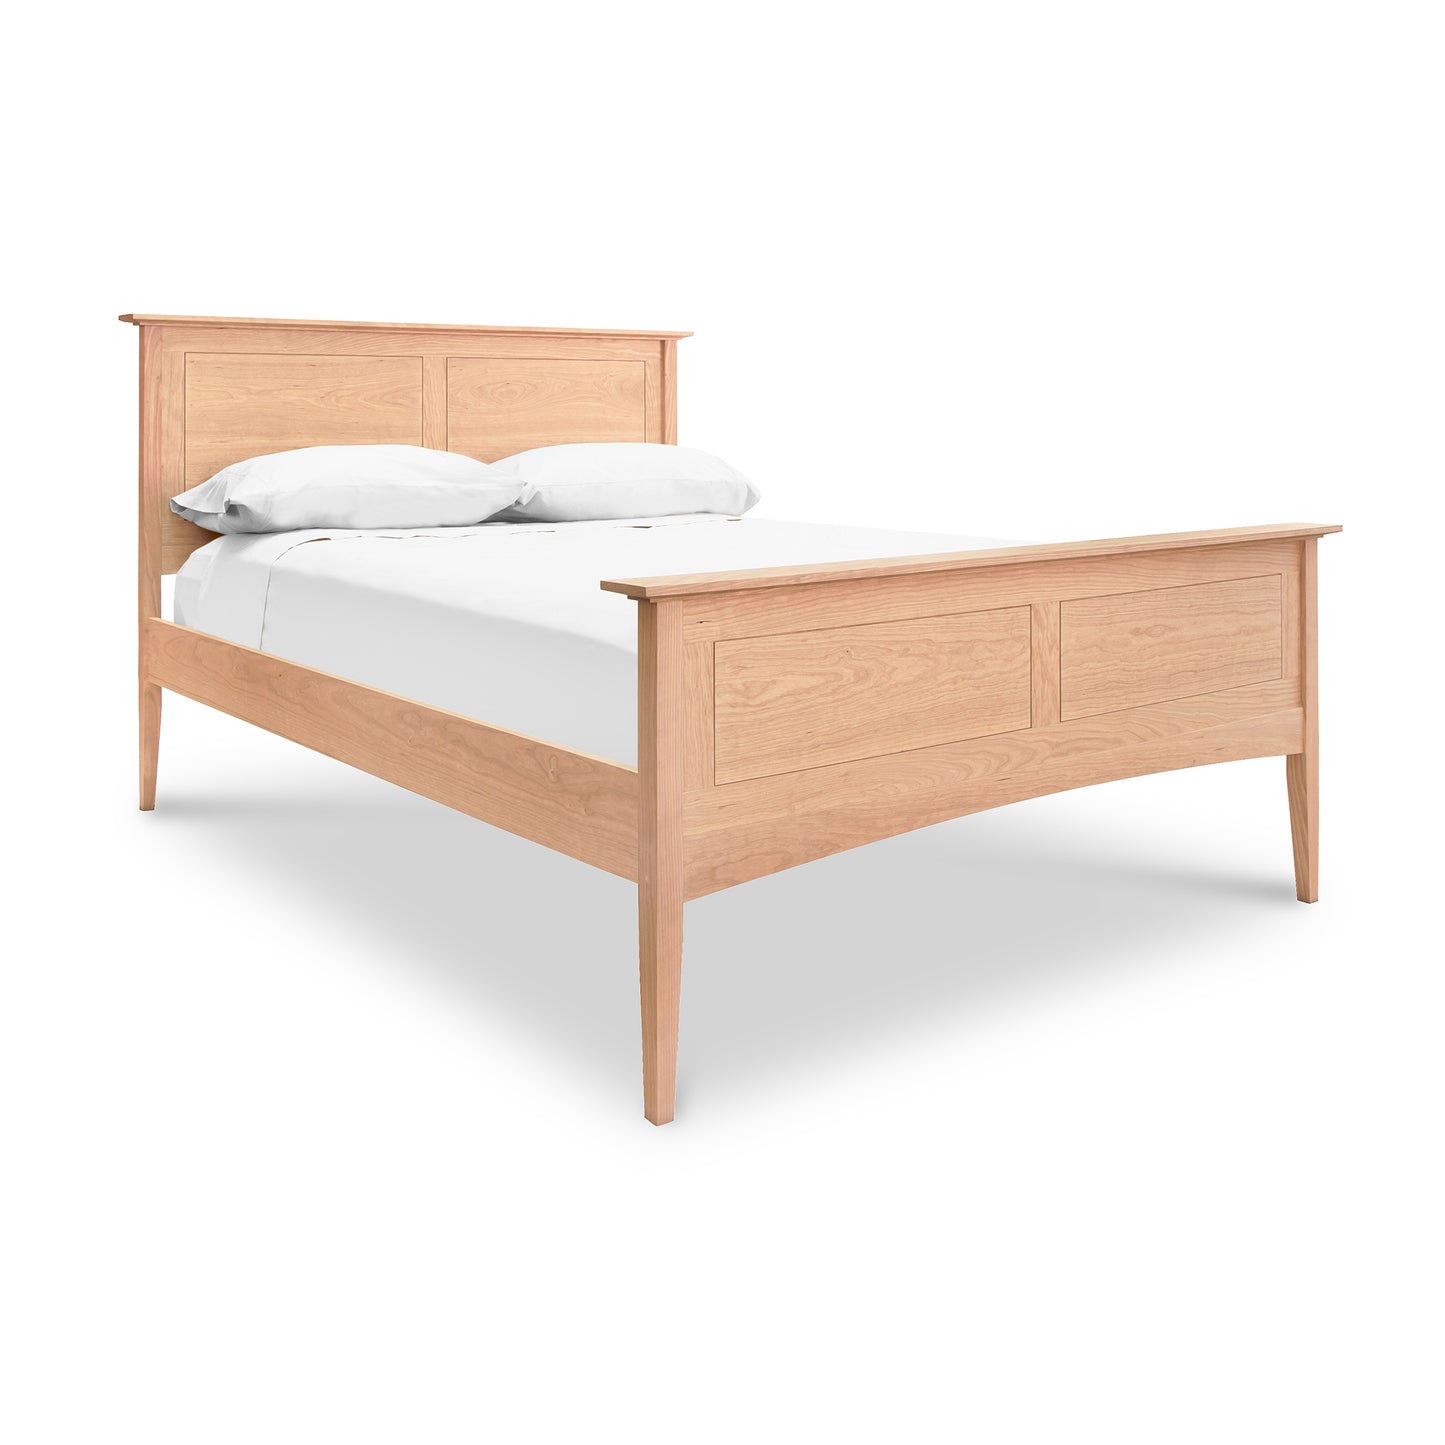 A Maple Corner Woodworks American Shaker Panel Bed with white sheets on it.